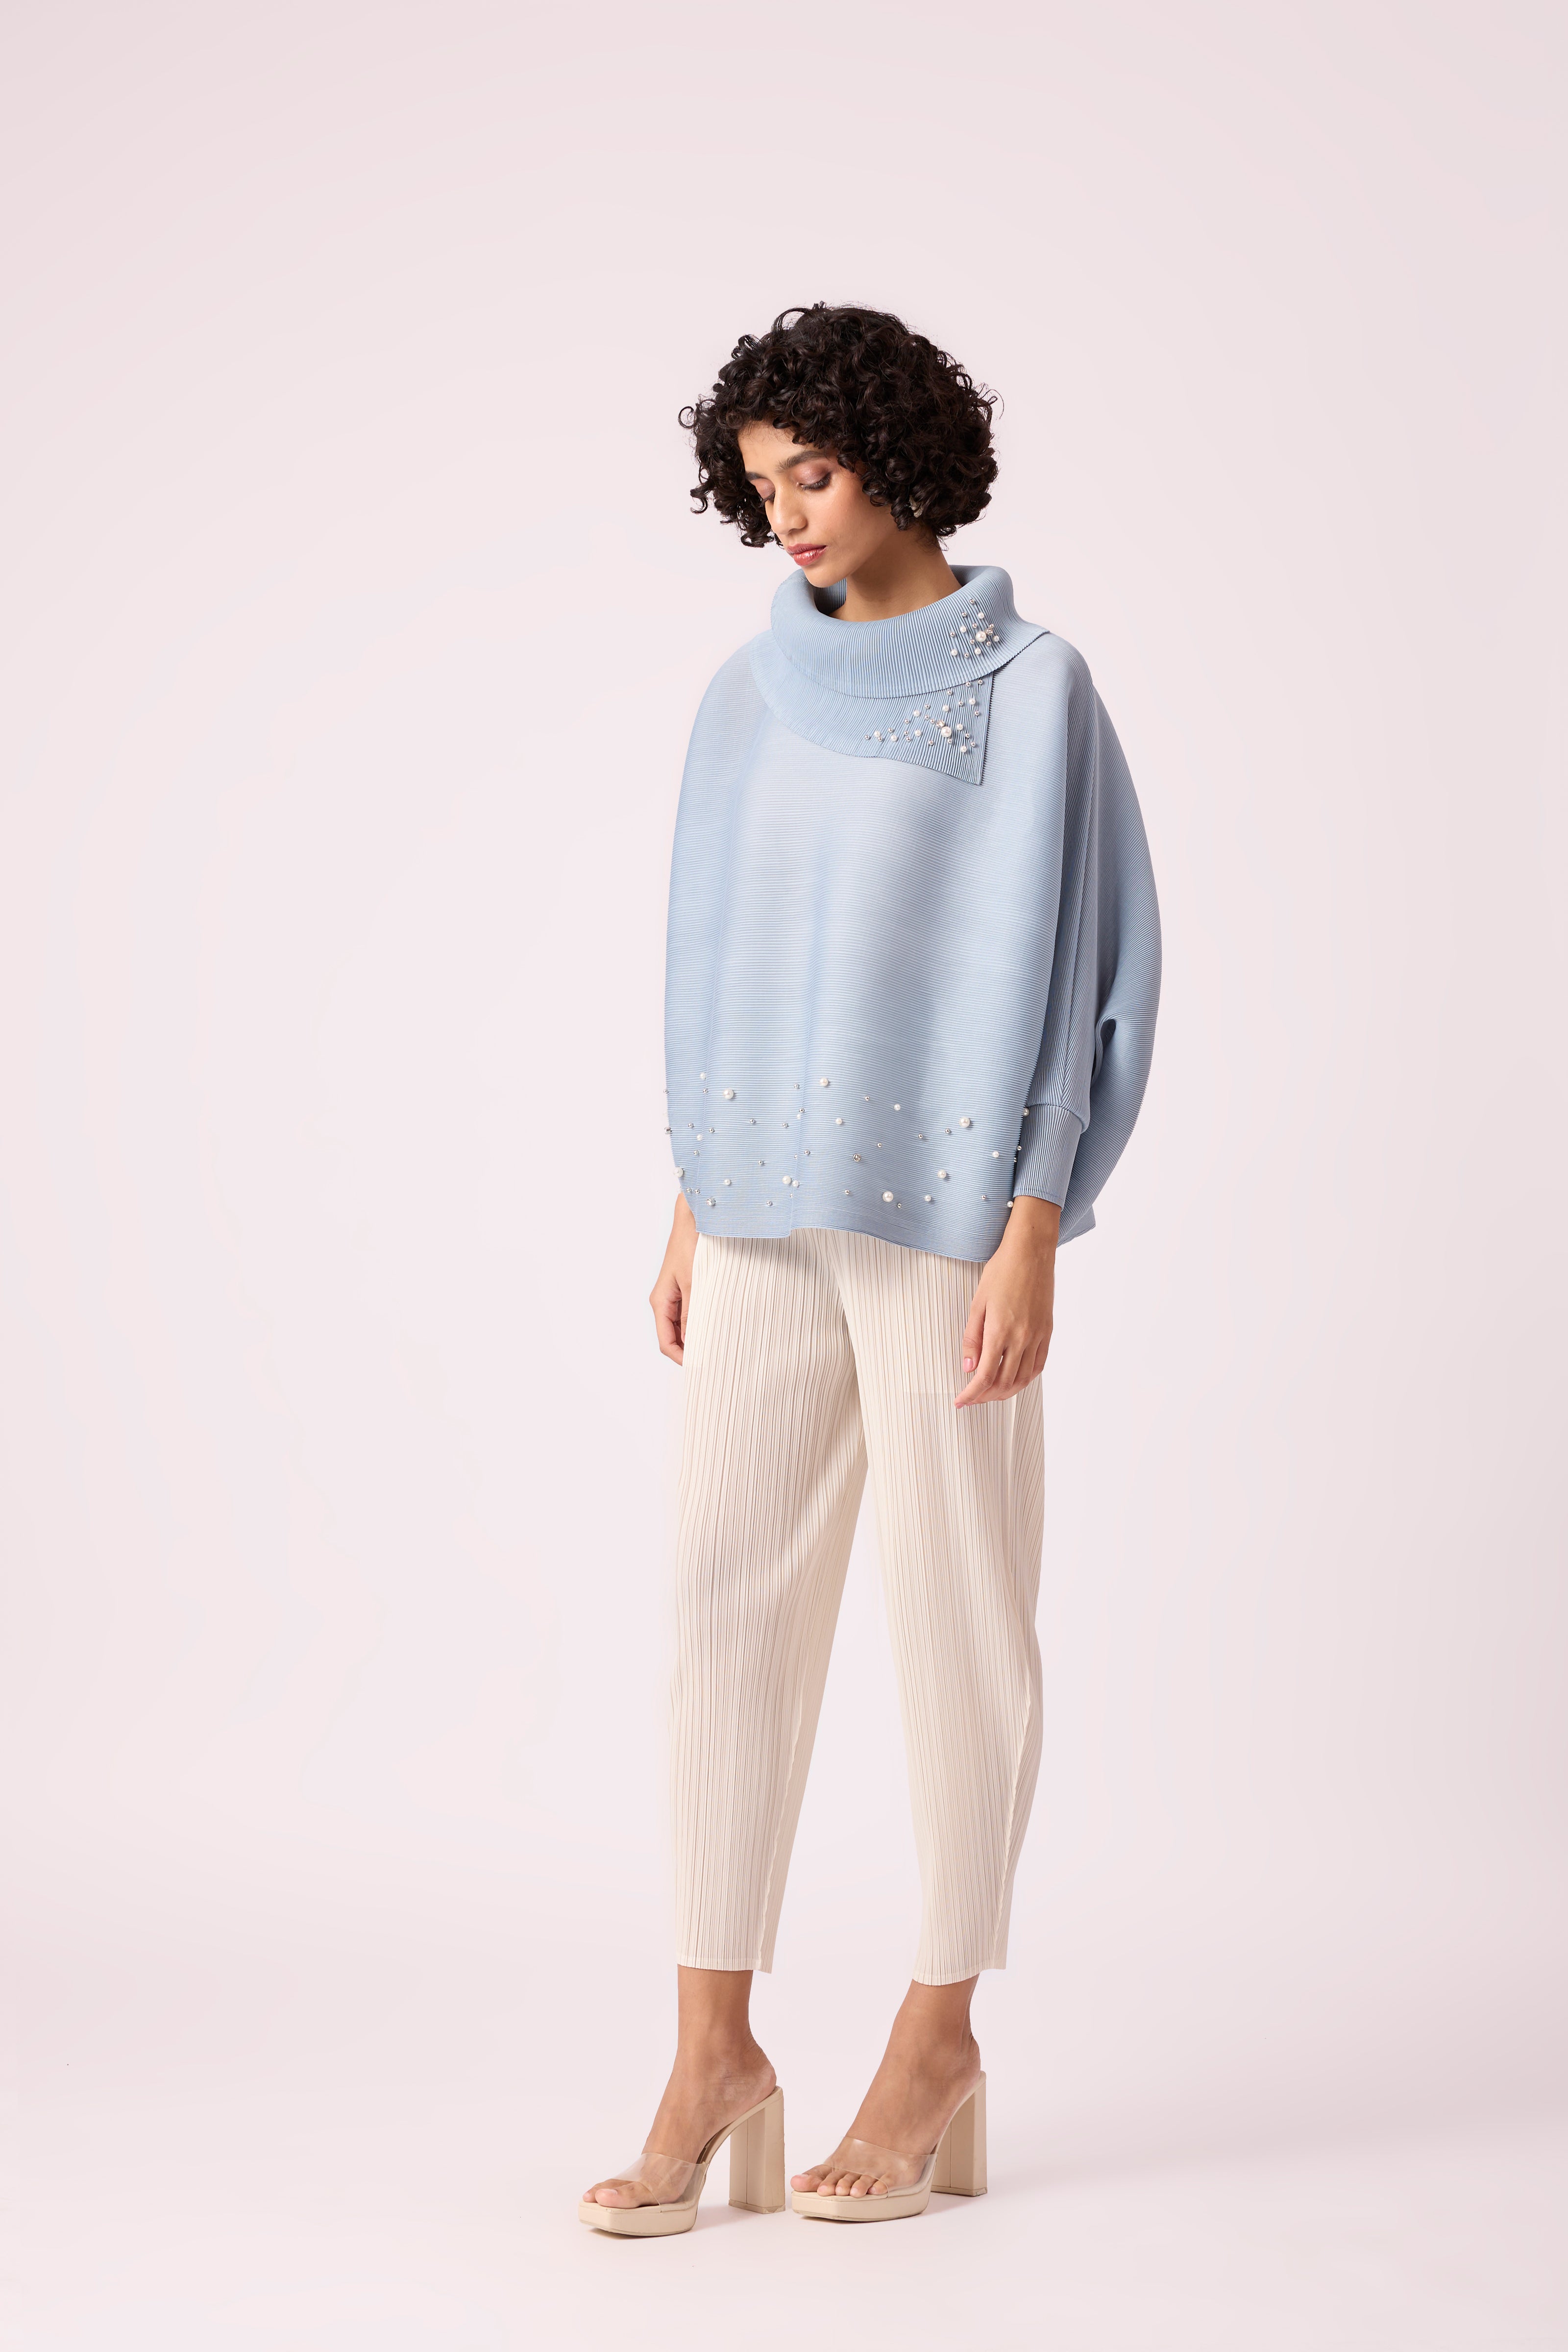 Sloane Pearled Batwing Top - Light Blue